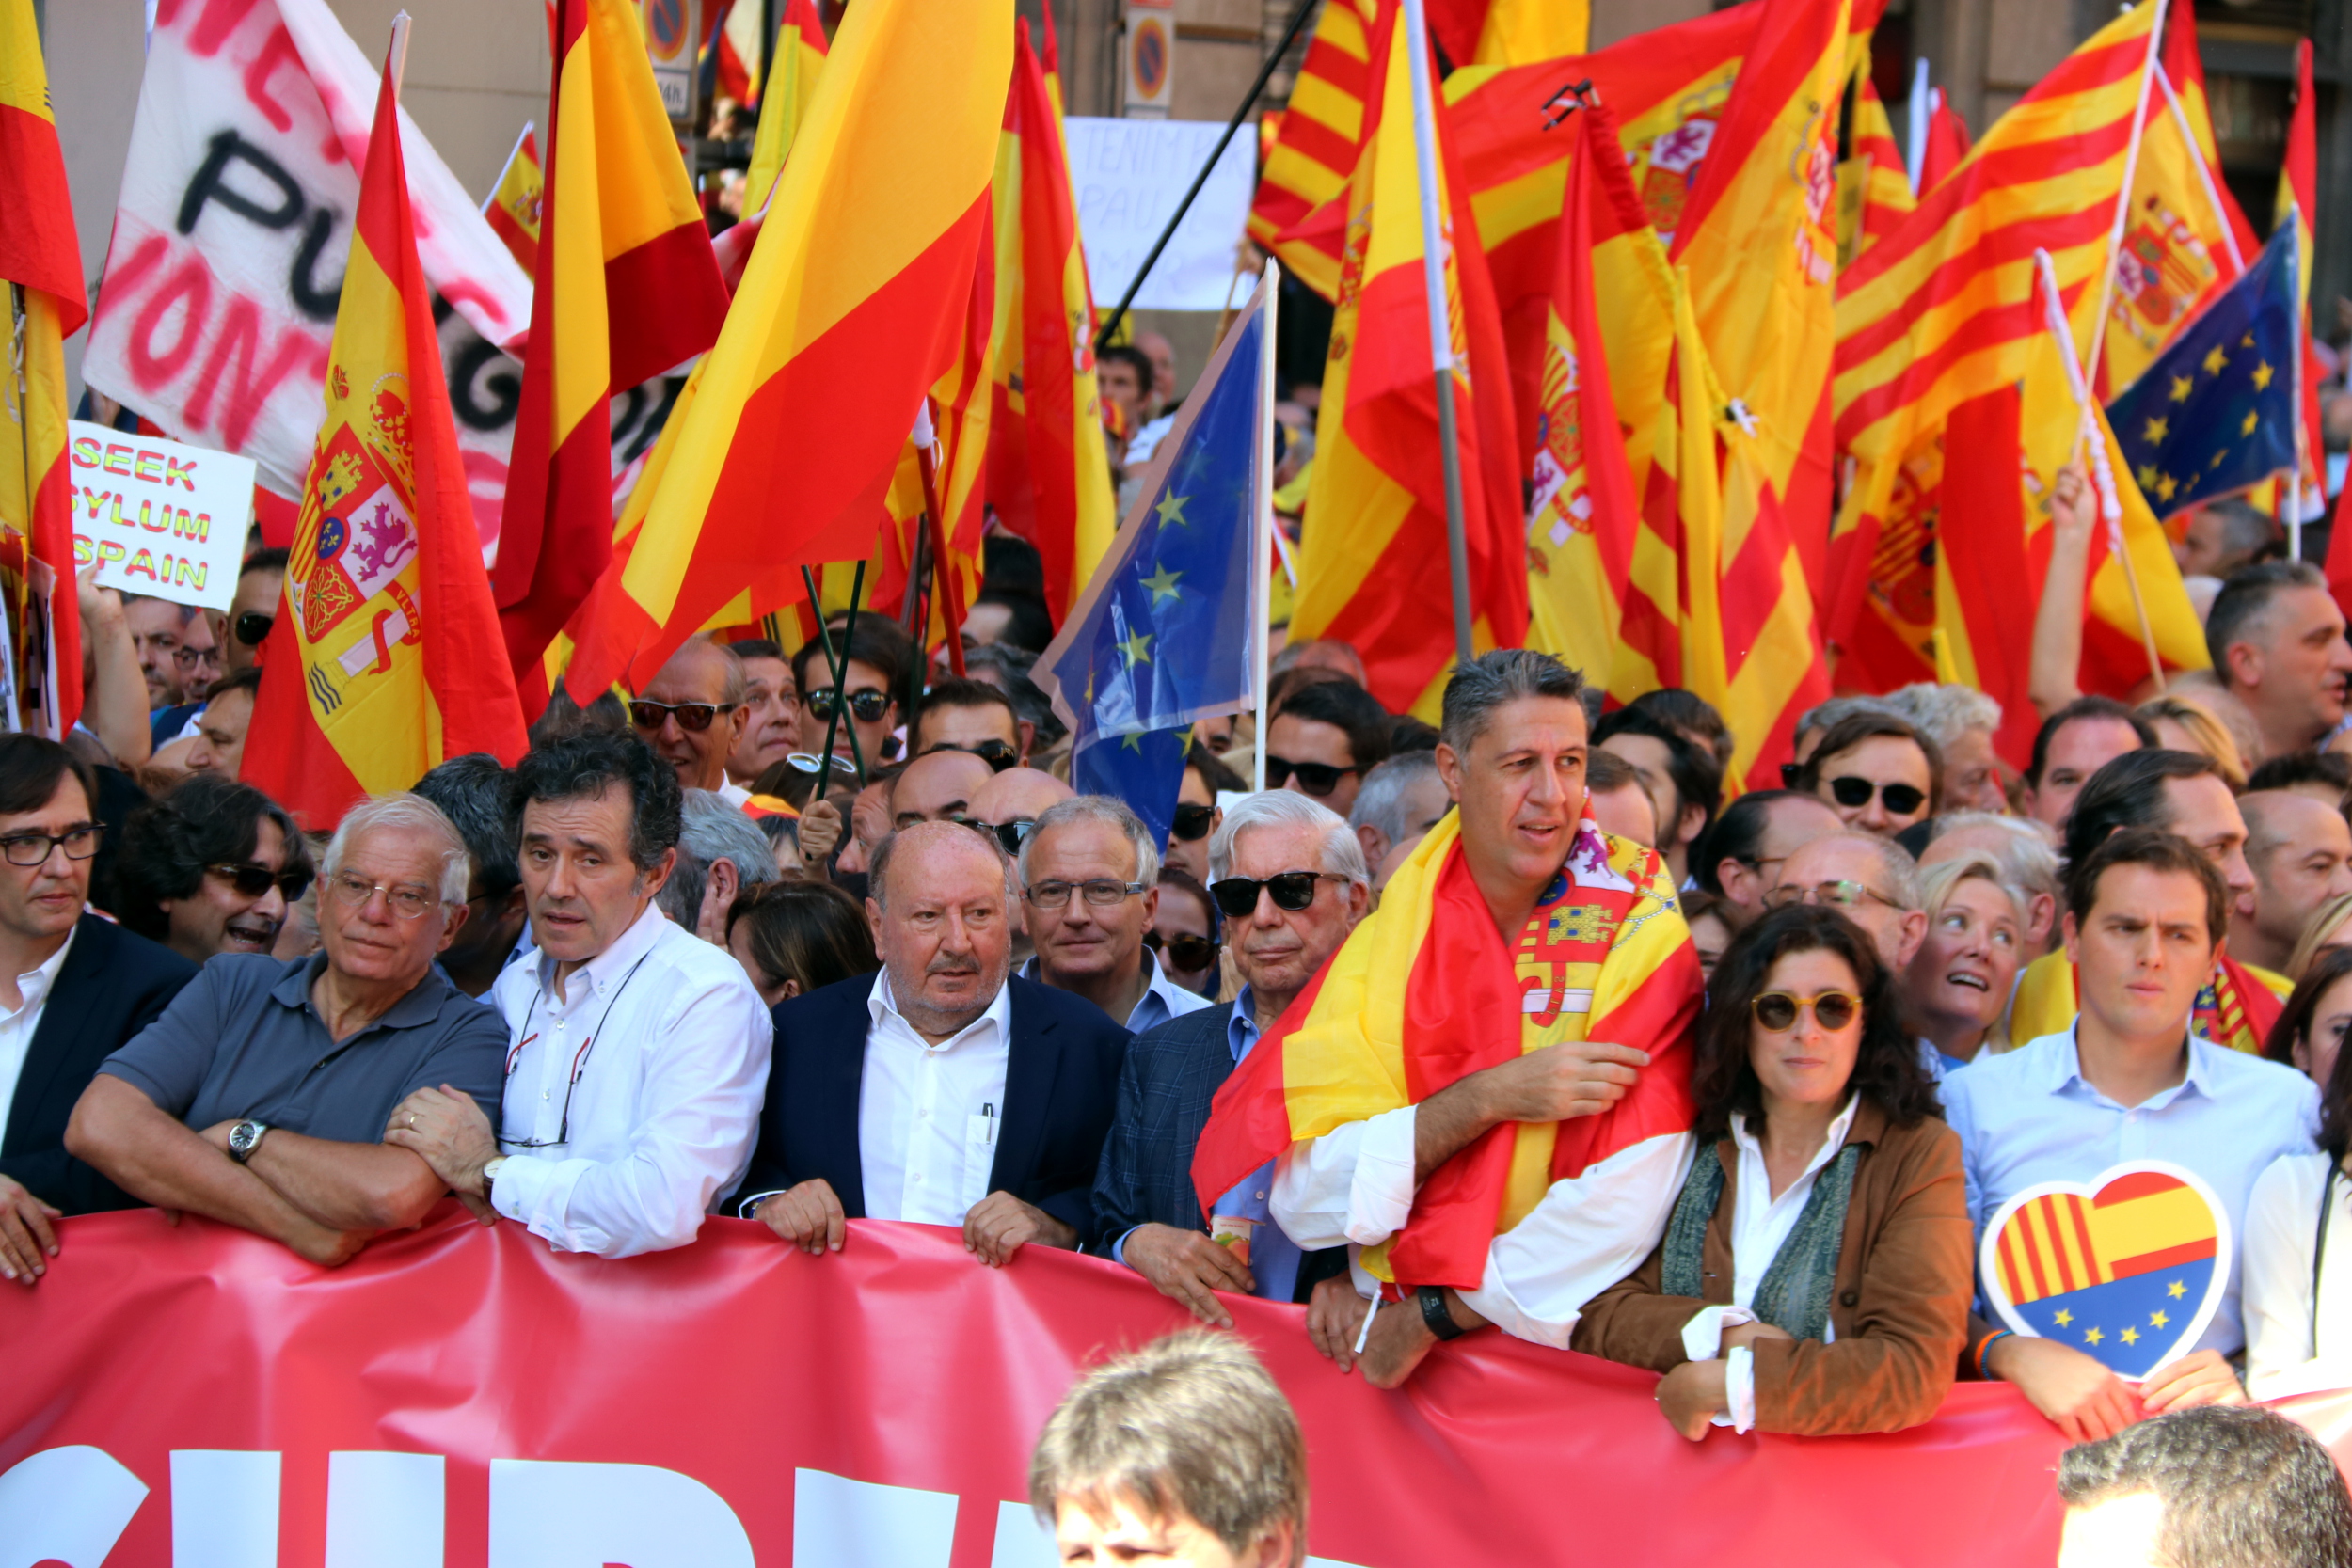 The march for Spanish unity and against independence on October 8 with representation from the Catalan Civil Society, the People's Party, and Ciutadans as well as former European Parliament president Josep Borrell (by ACN)  